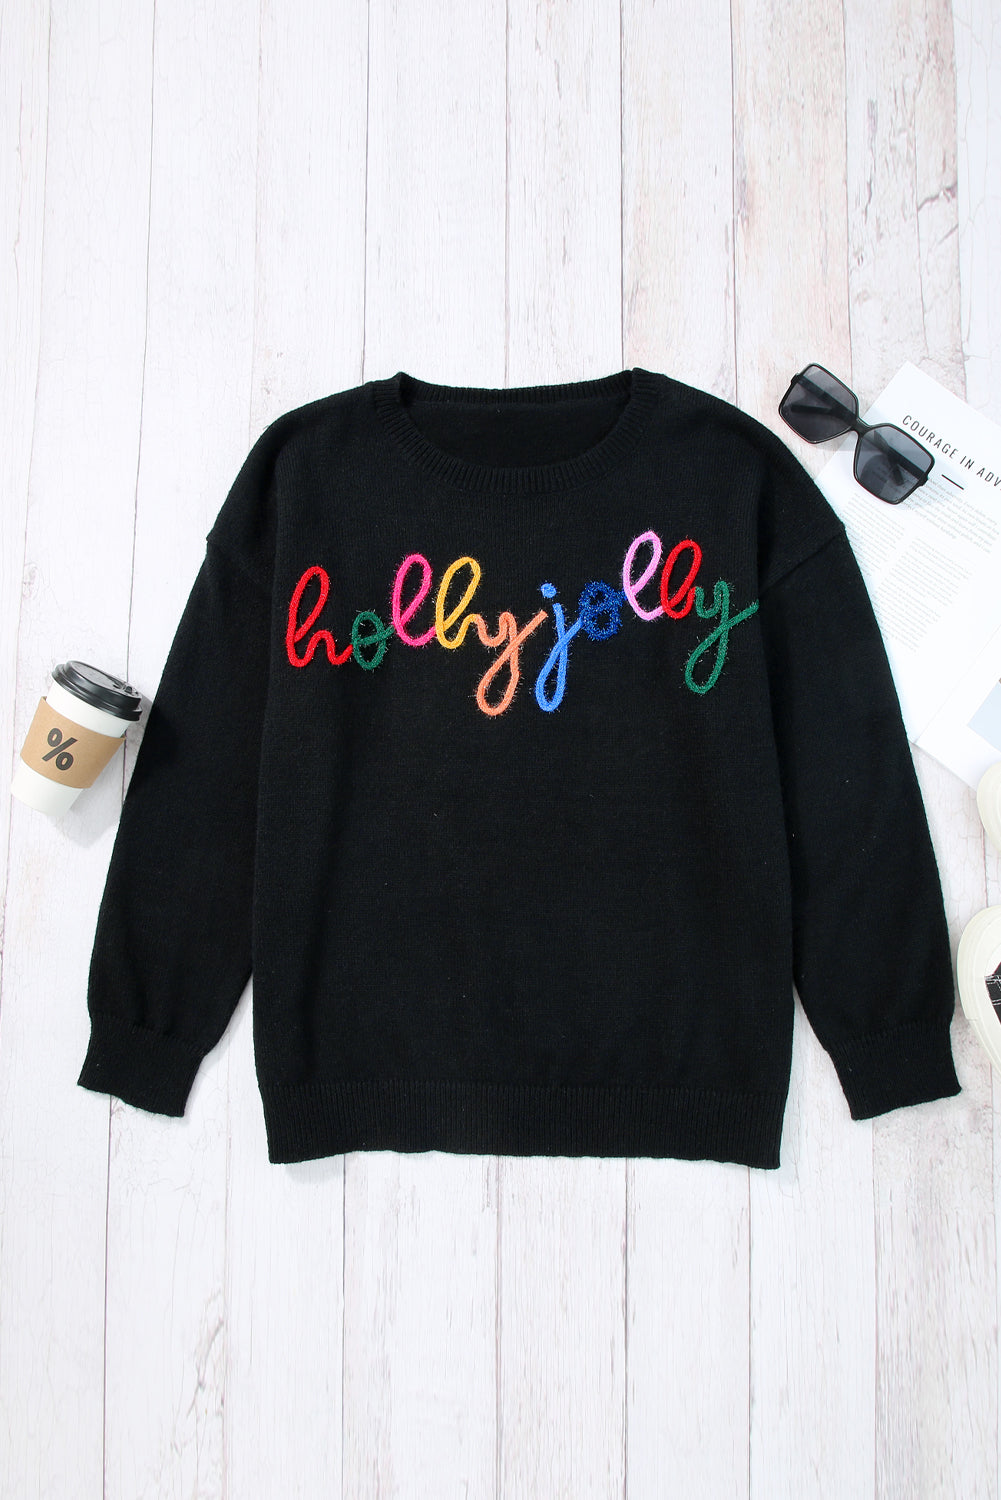 Black Holly Jolly Round Neck Casual Sweater